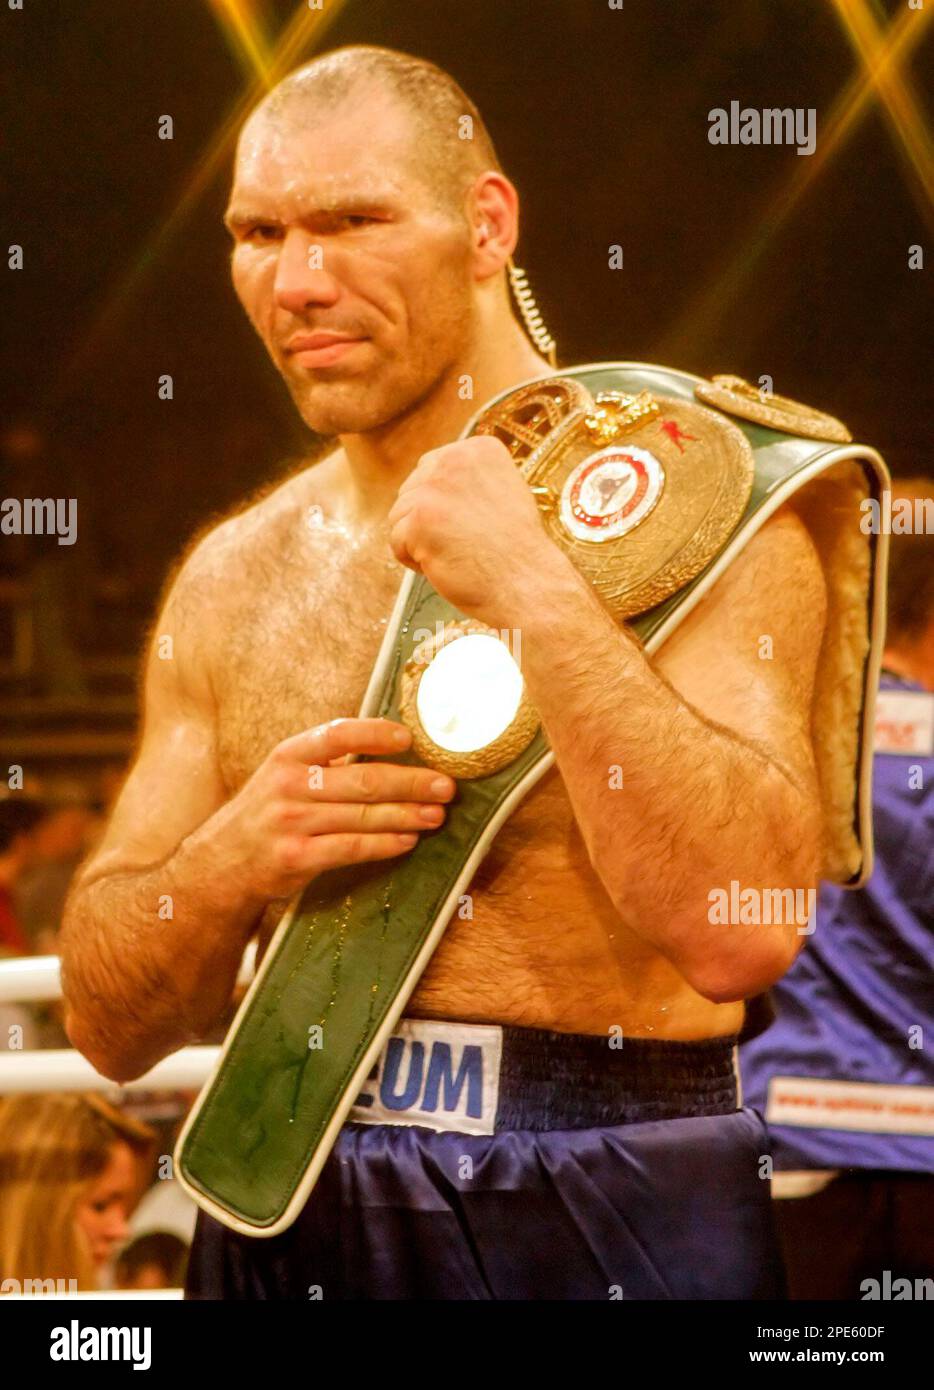 Russian boxer Nicolai Valuev celebrates with his champion belt after he has  knocked out his challenger US boxer Clifford Etienne in the third round  during their heavyweight WBA Intercontinental title bout in